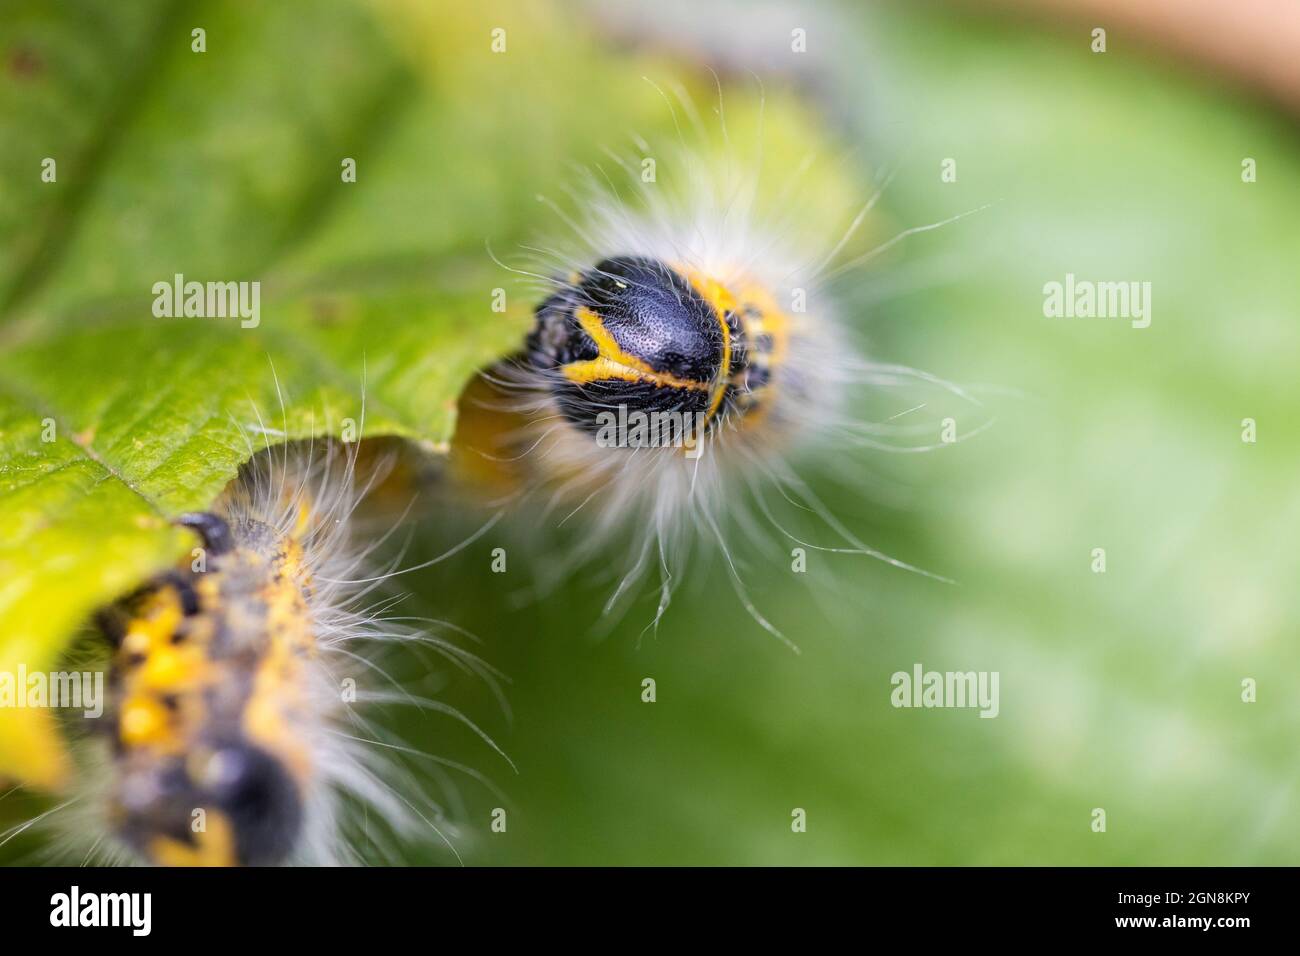 The eyes of a buff-tip caterpillar sitting on a leaf of a hazelnut tree.  The insect, also called a phalera bucephala and is yellow with black stripes  Stock Photo - Alamy